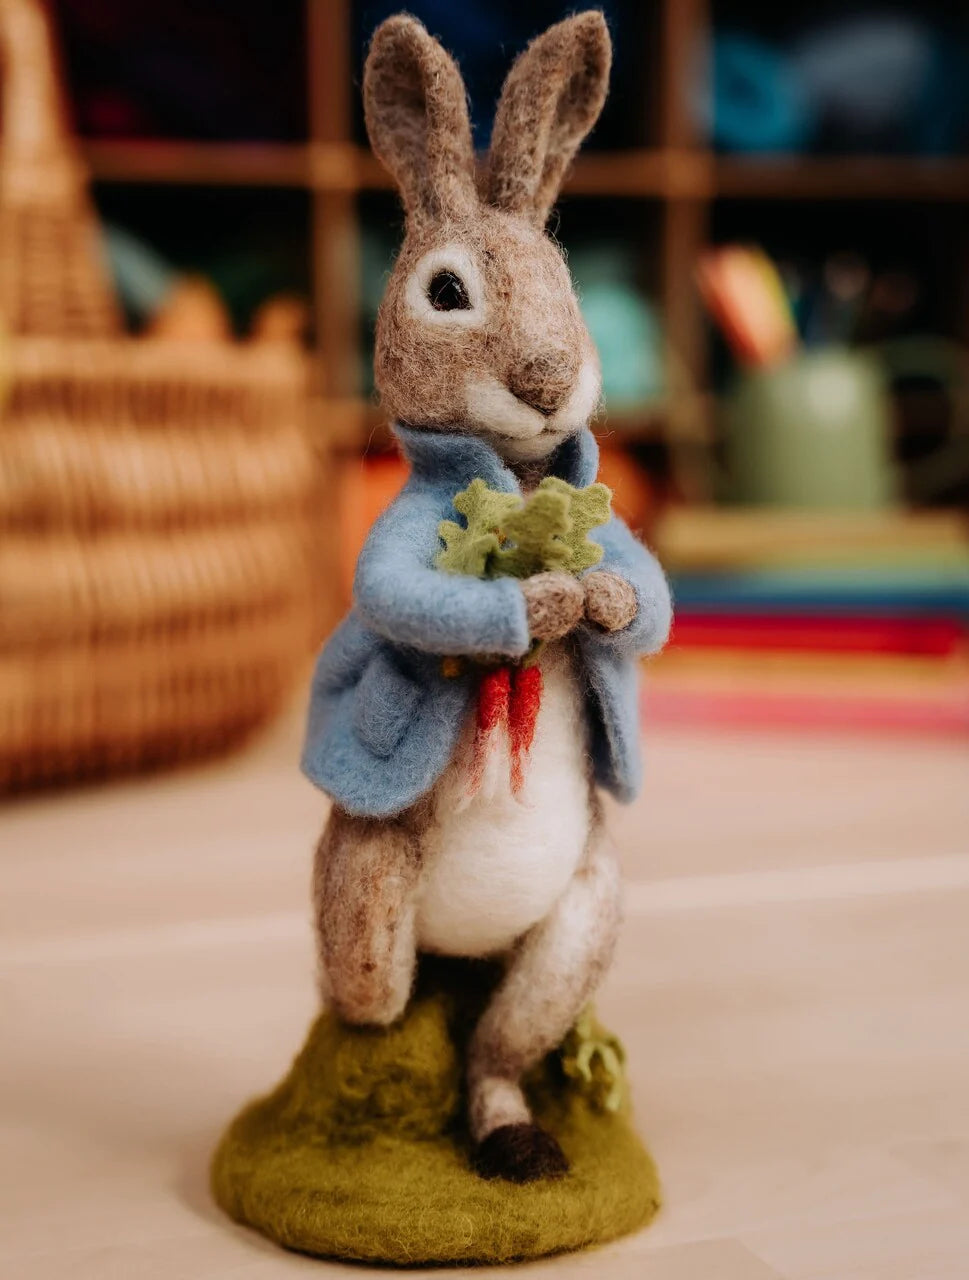 Peter Rabbit and the stolen radishes Needle Felting Kit from The Crafty Kit Company